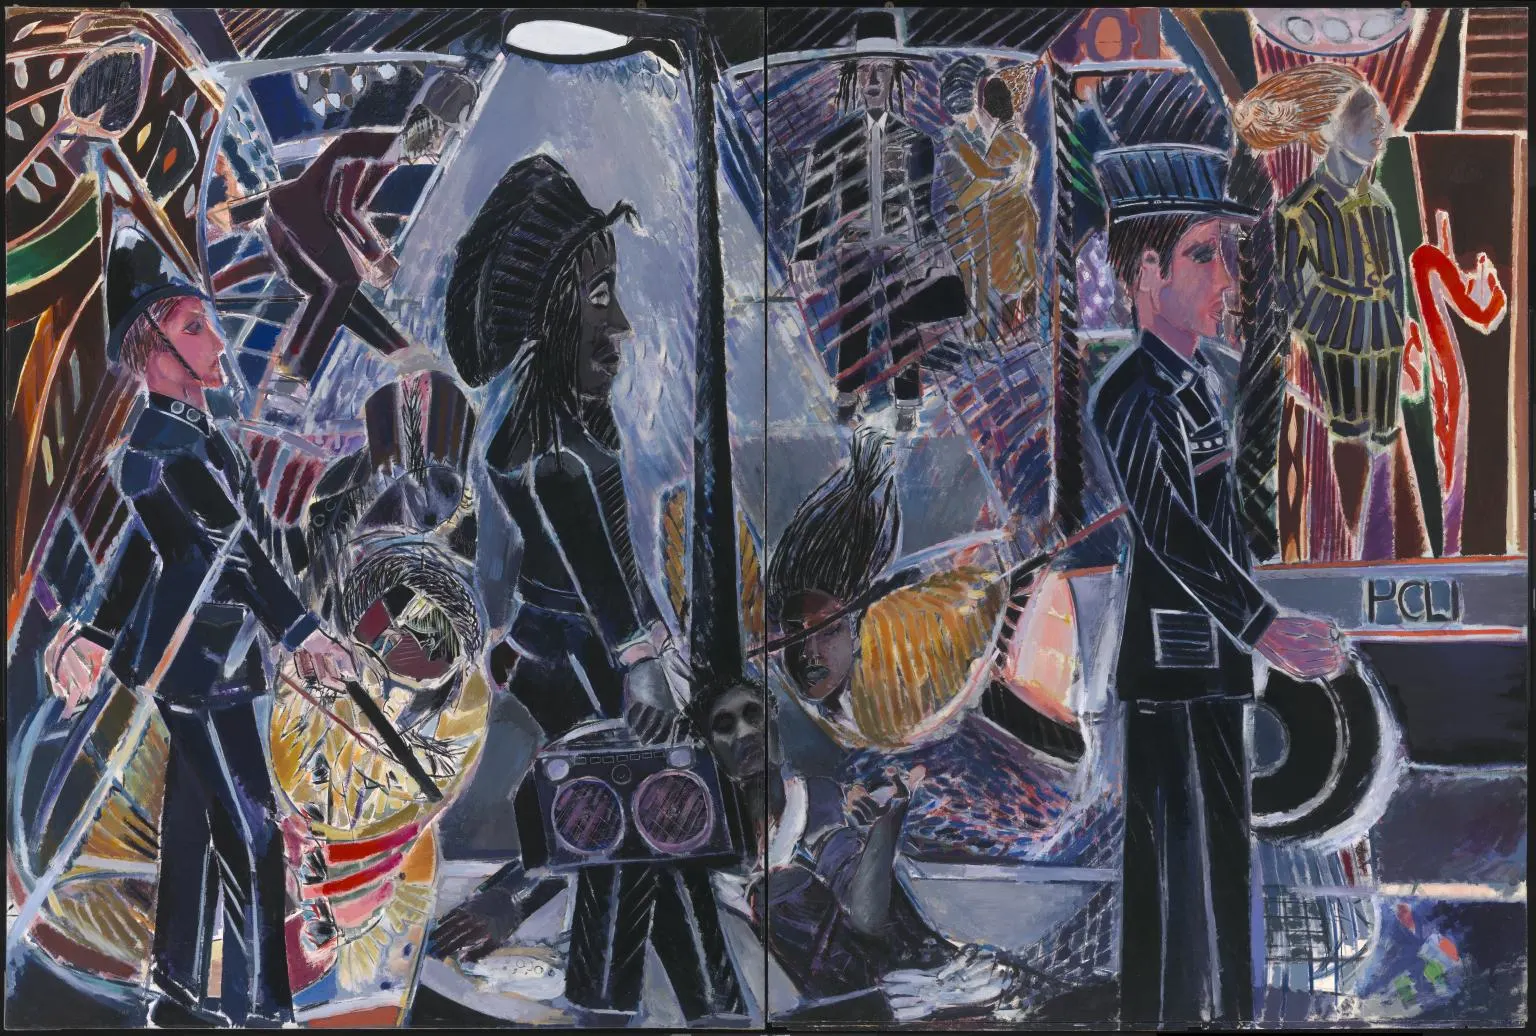 <p>Denzil Forrester, 'Three Wicked Men', 1982, Tate Collection, UK.</p>